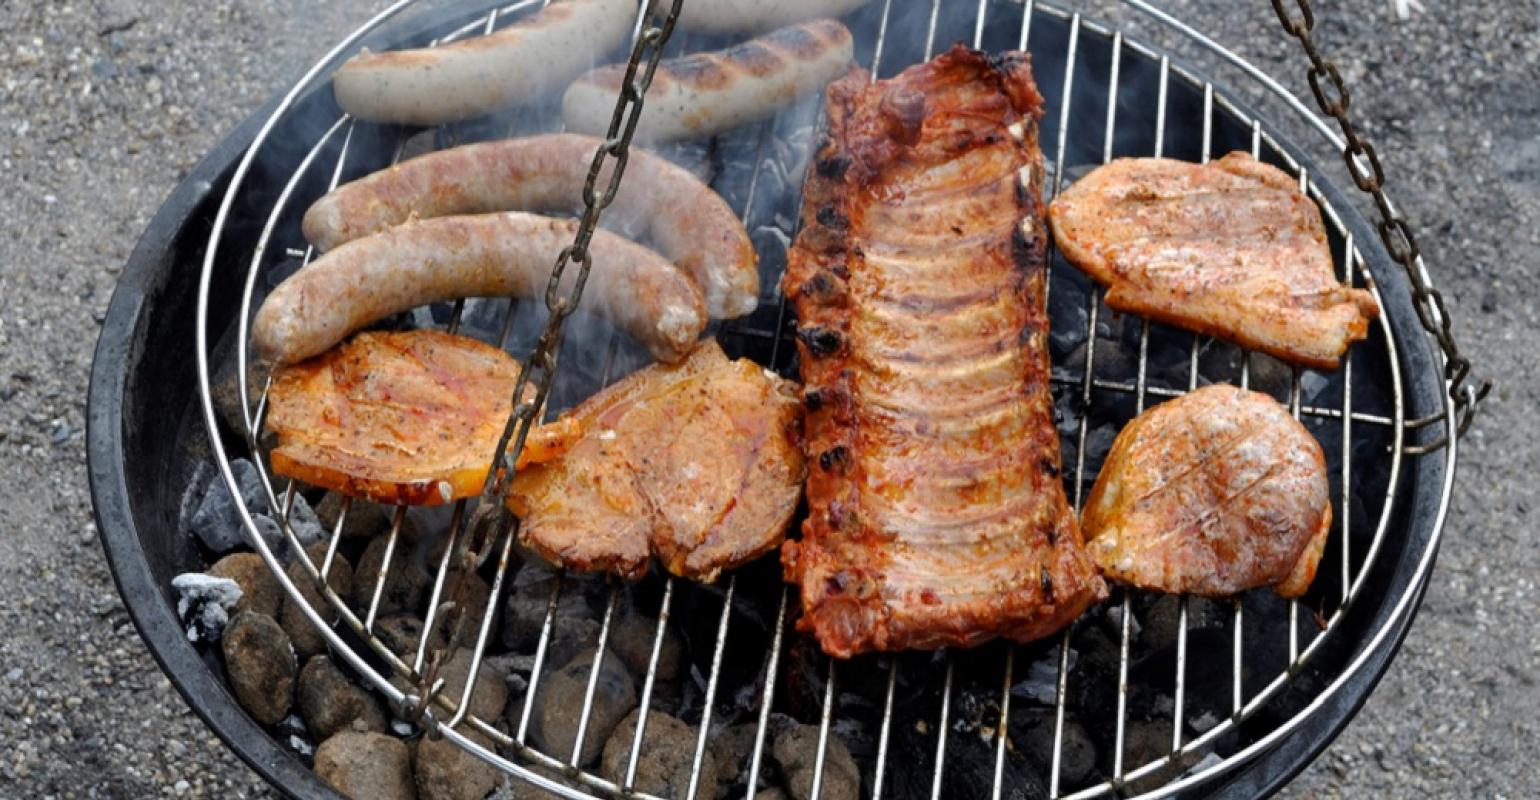 WinCo - Fill in the Blank: My favorite meat to grill is ______